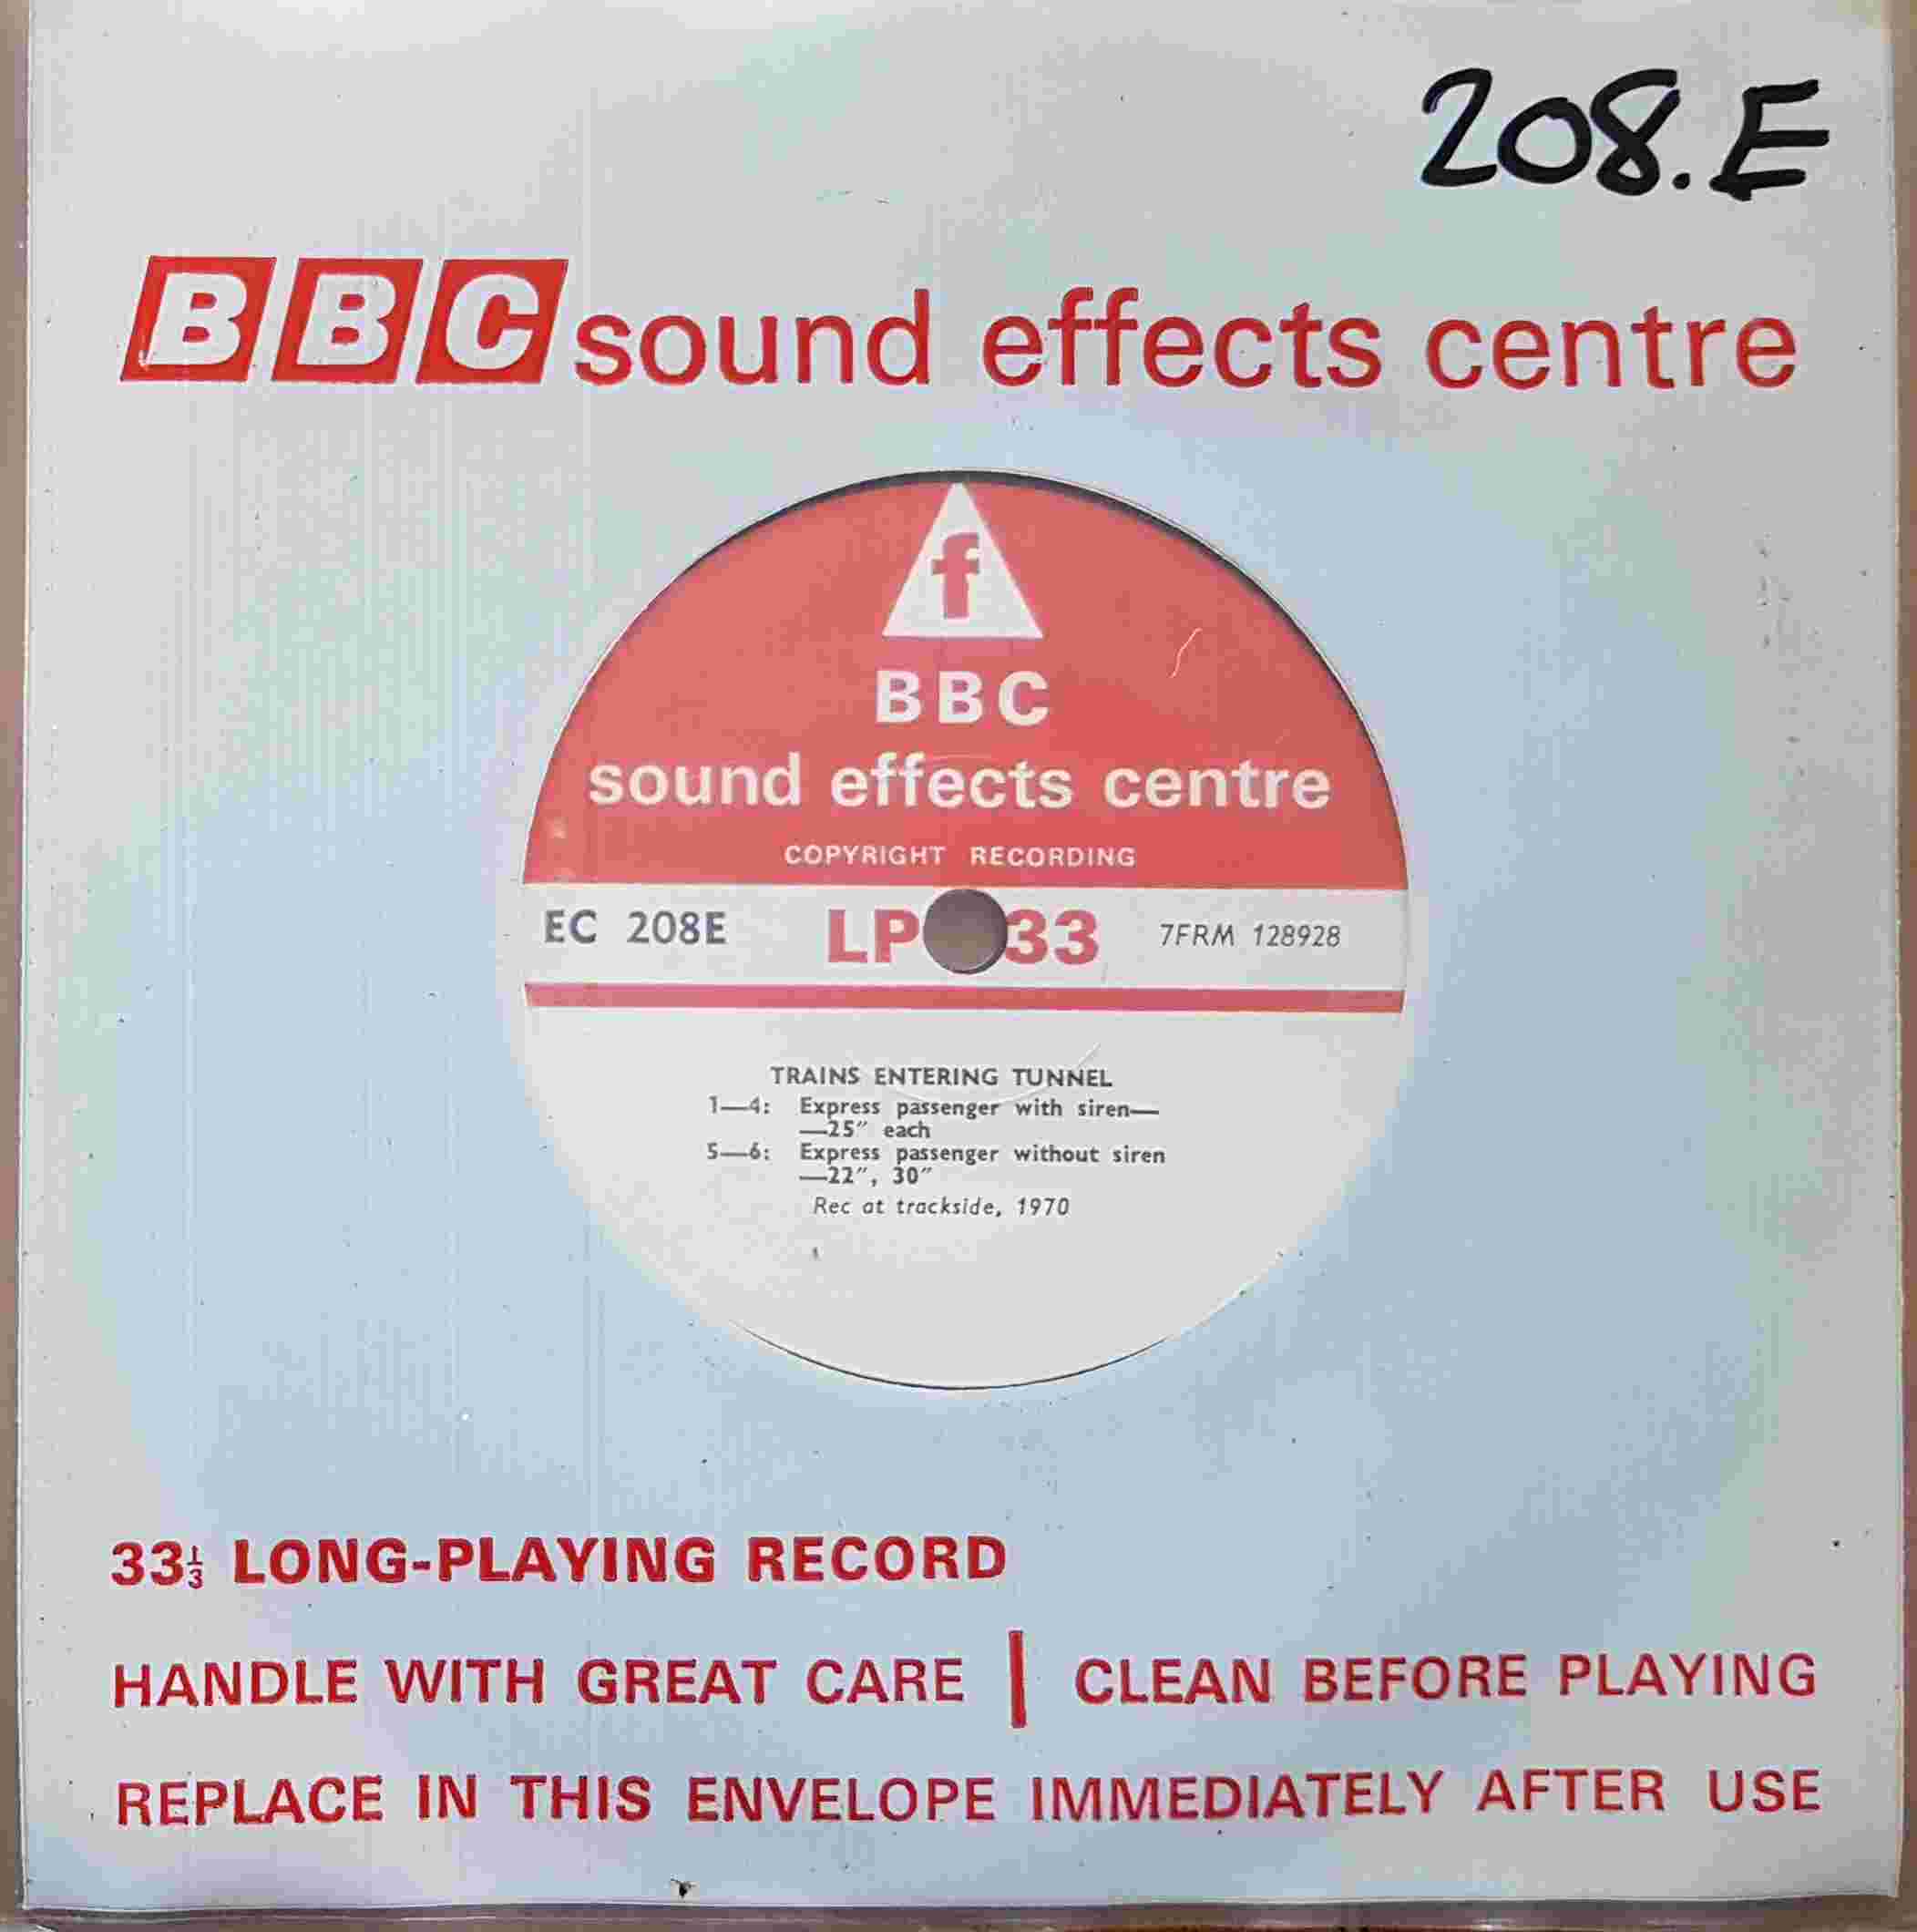 Picture of EC 208E Trains entering tunnel / Trains & tunnels by artist Not registered from the BBC singles - Records and Tapes library